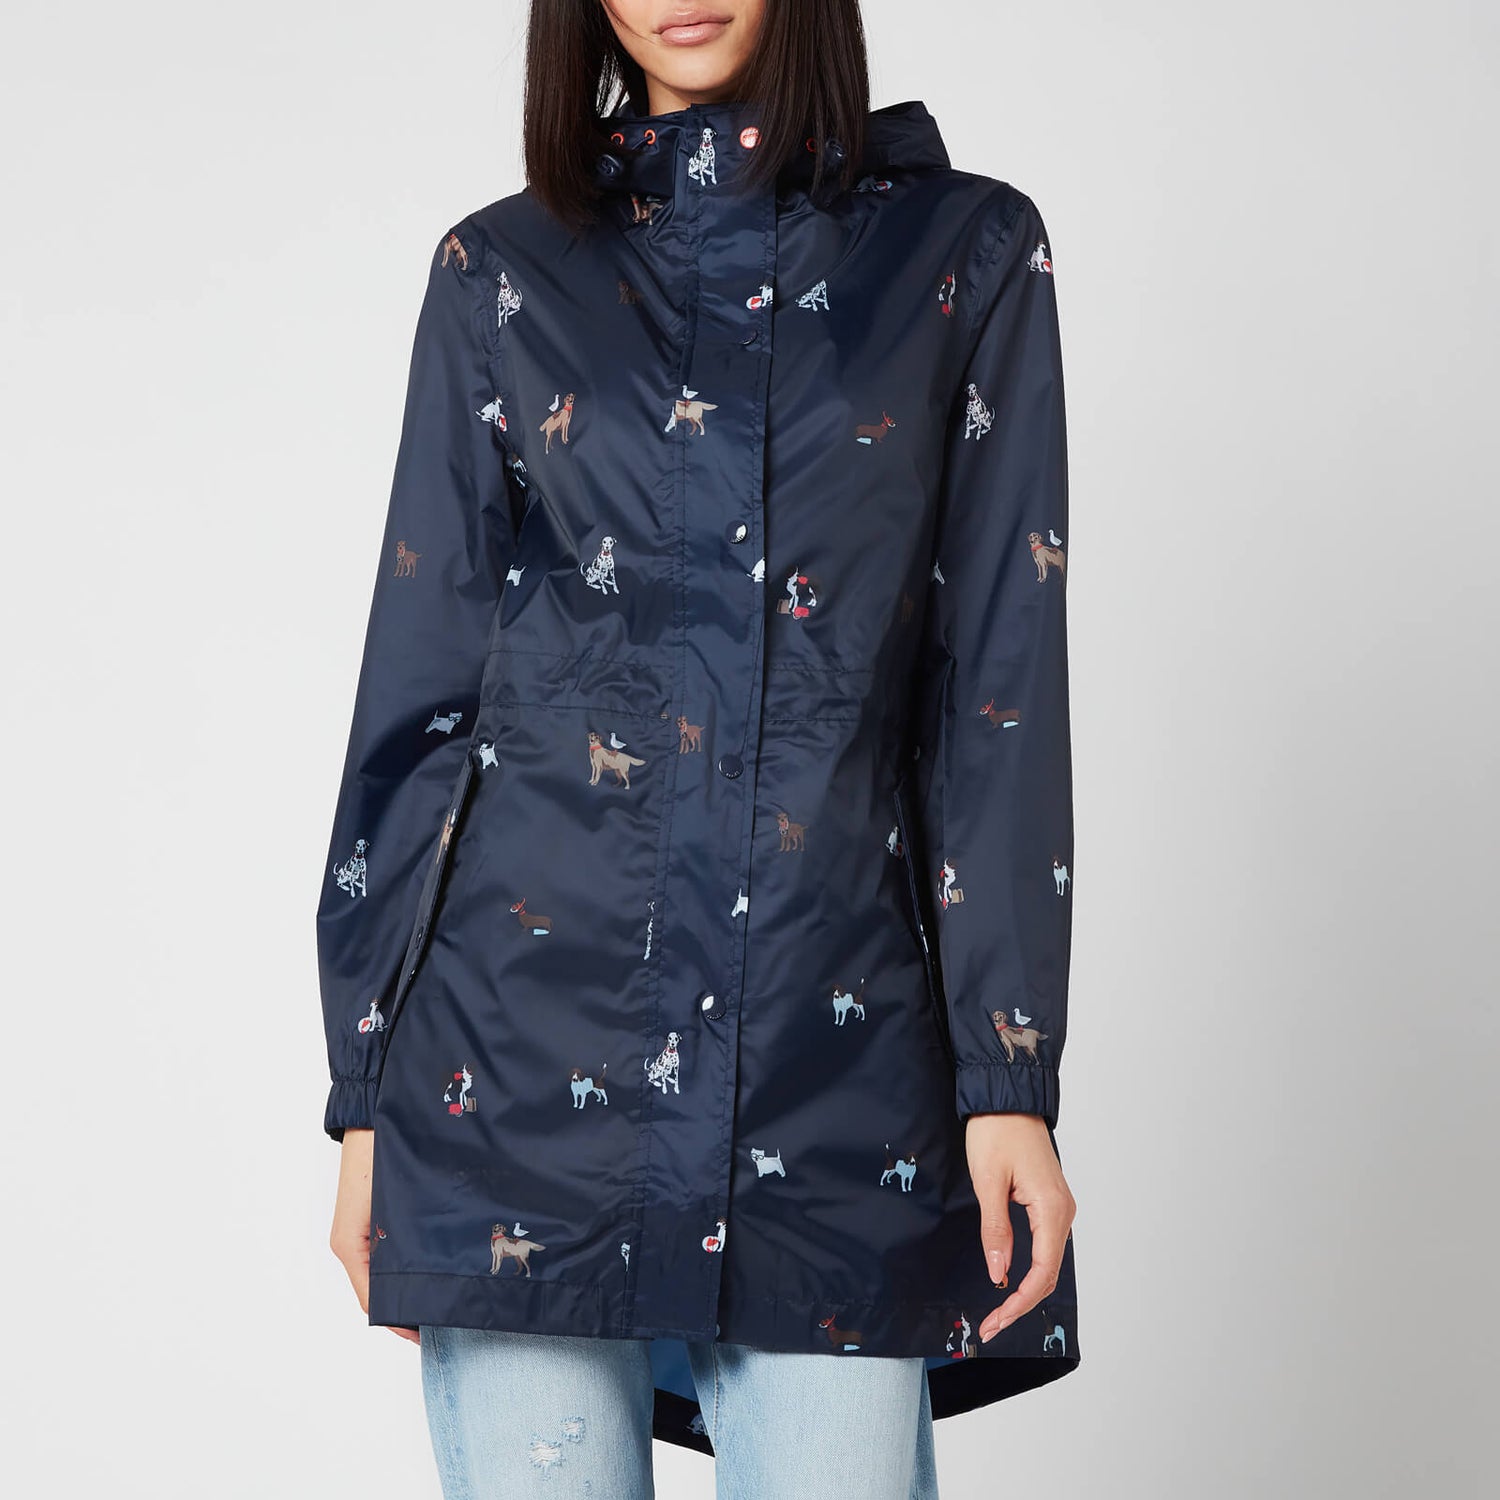 Joules Women's Golightly Packable Jacket - Navy Dog